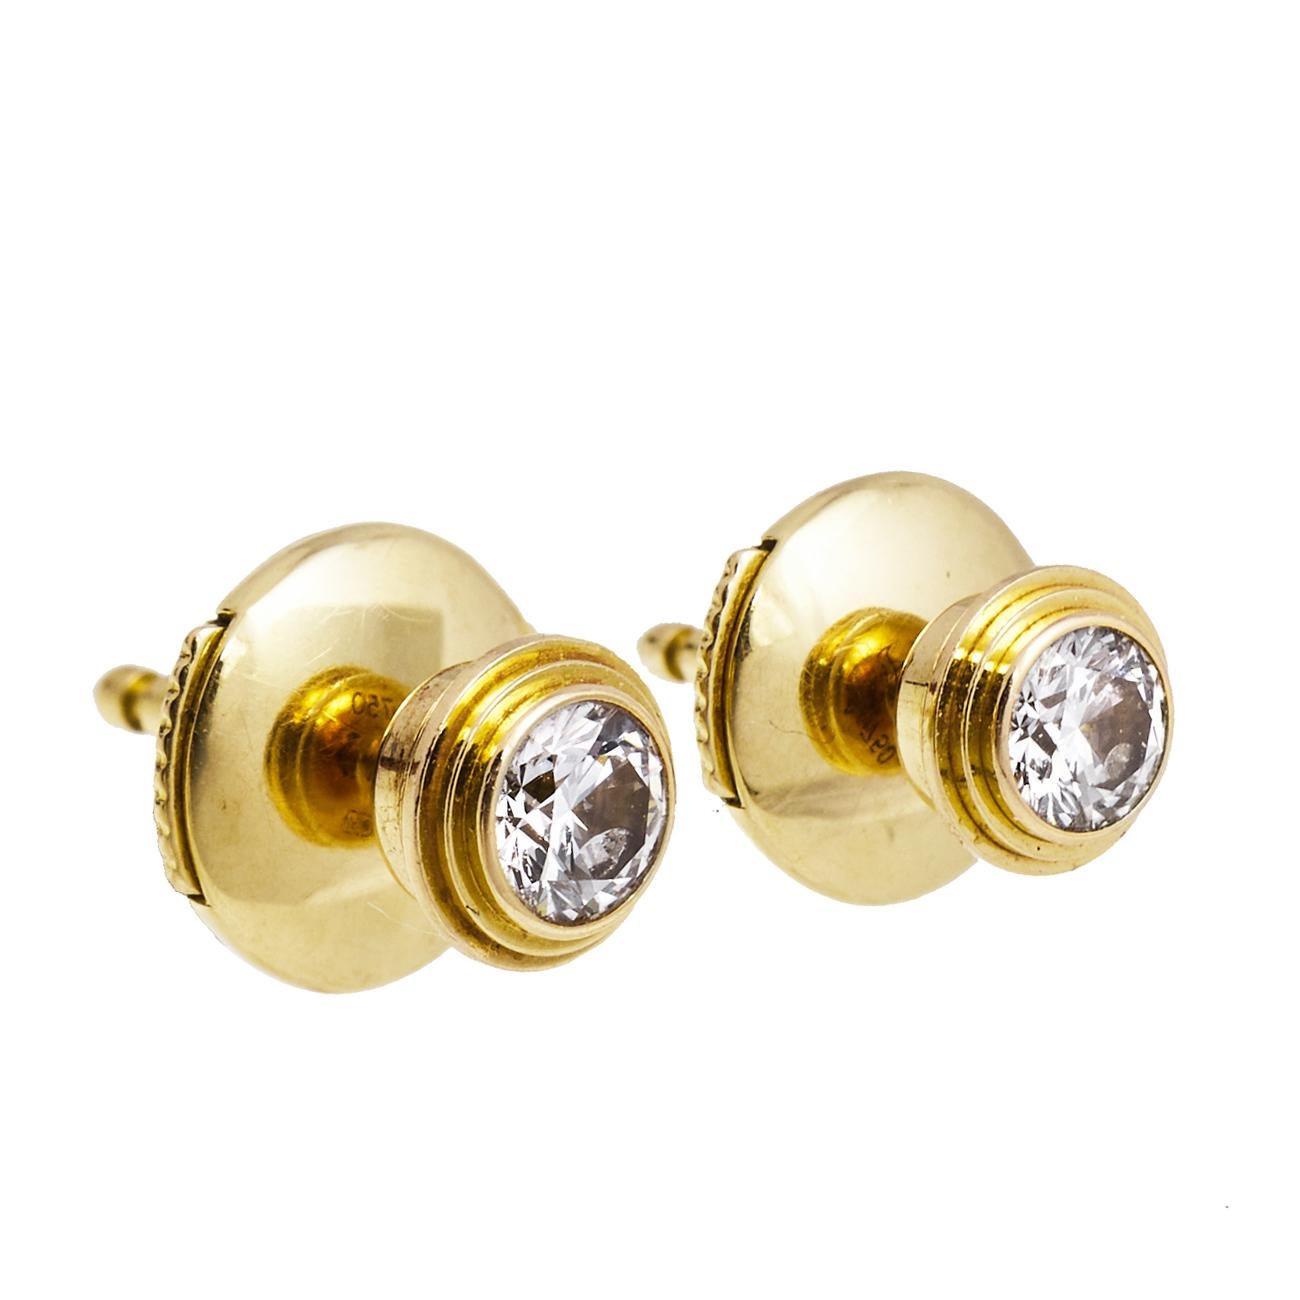 The Diamants Legers collection from Cartier is all about bringing feminine elegance into light by deploying exceptional diamonds into minimalist designs, and the idea is well-translated into these earrings. They are sculpted from 18K yellow gold and